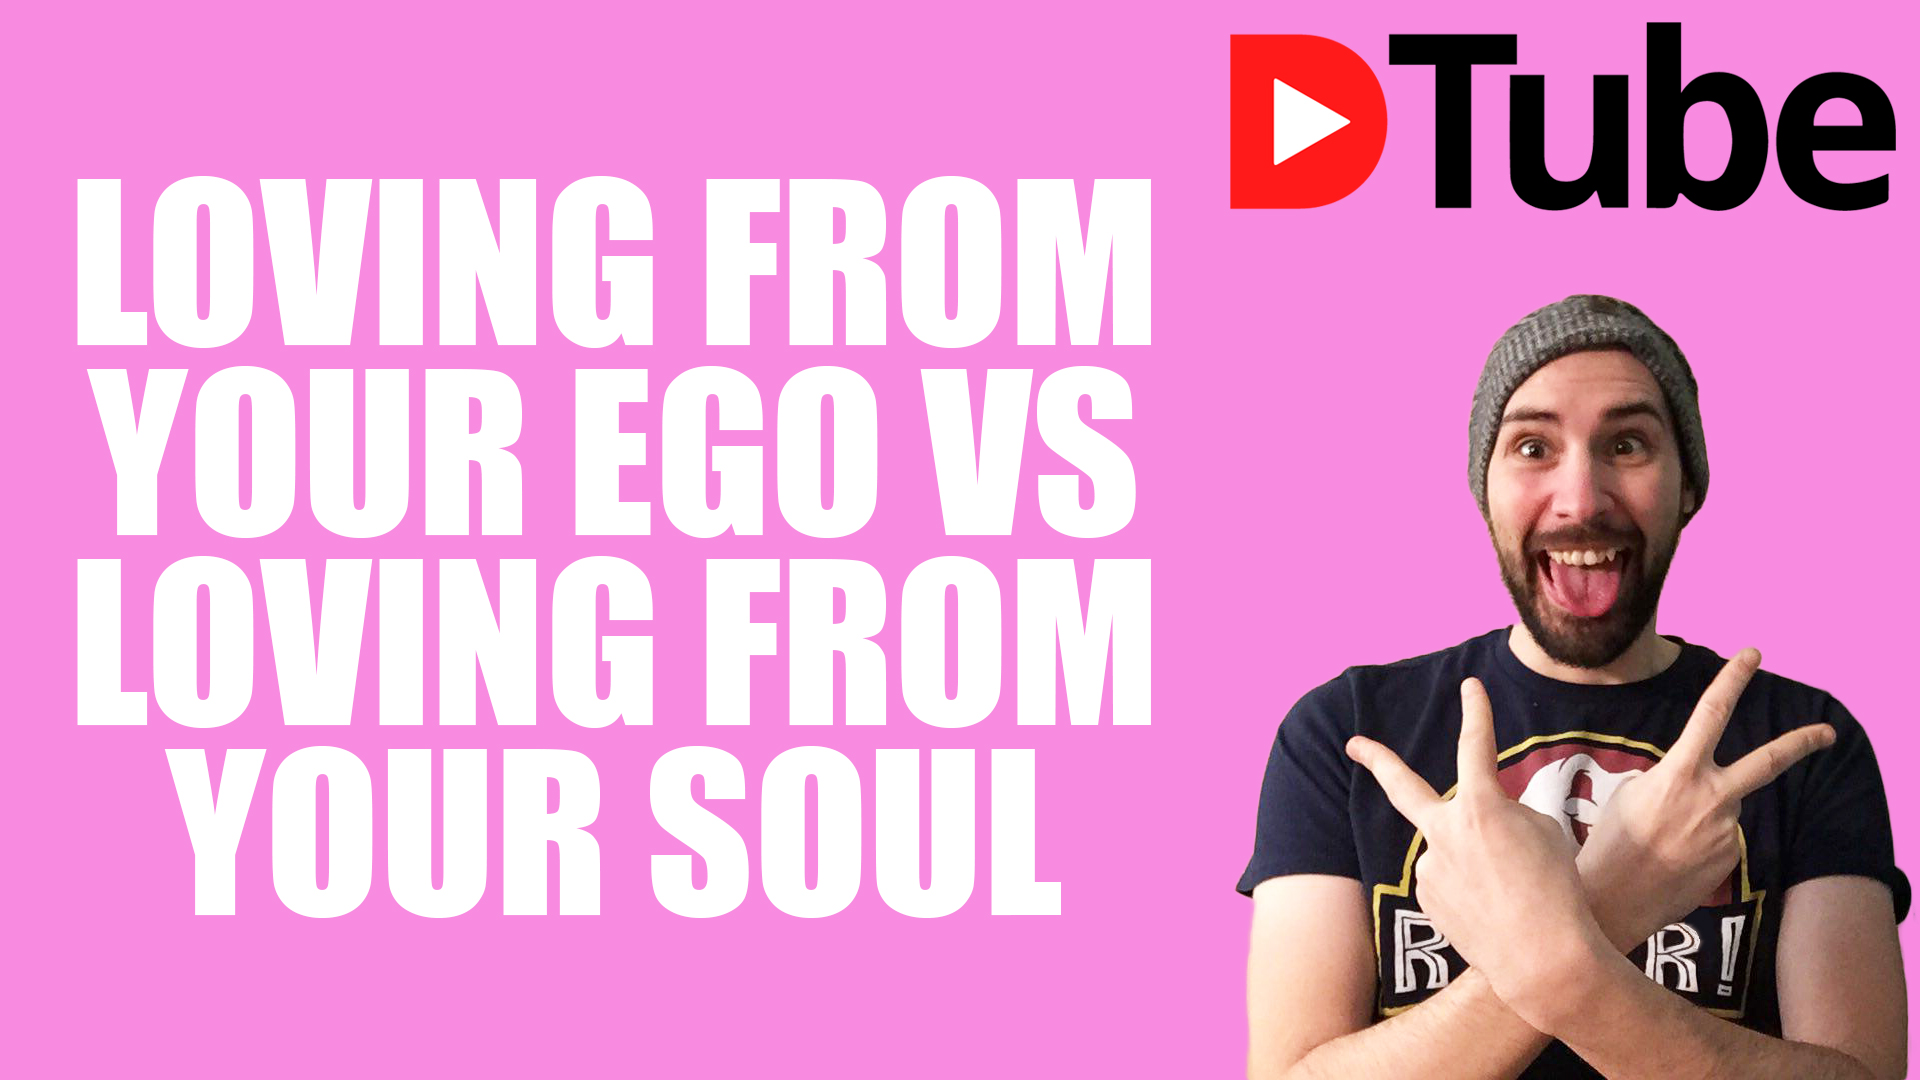 loving-from-your-ego-vs-loving-from-your-soul.jpg